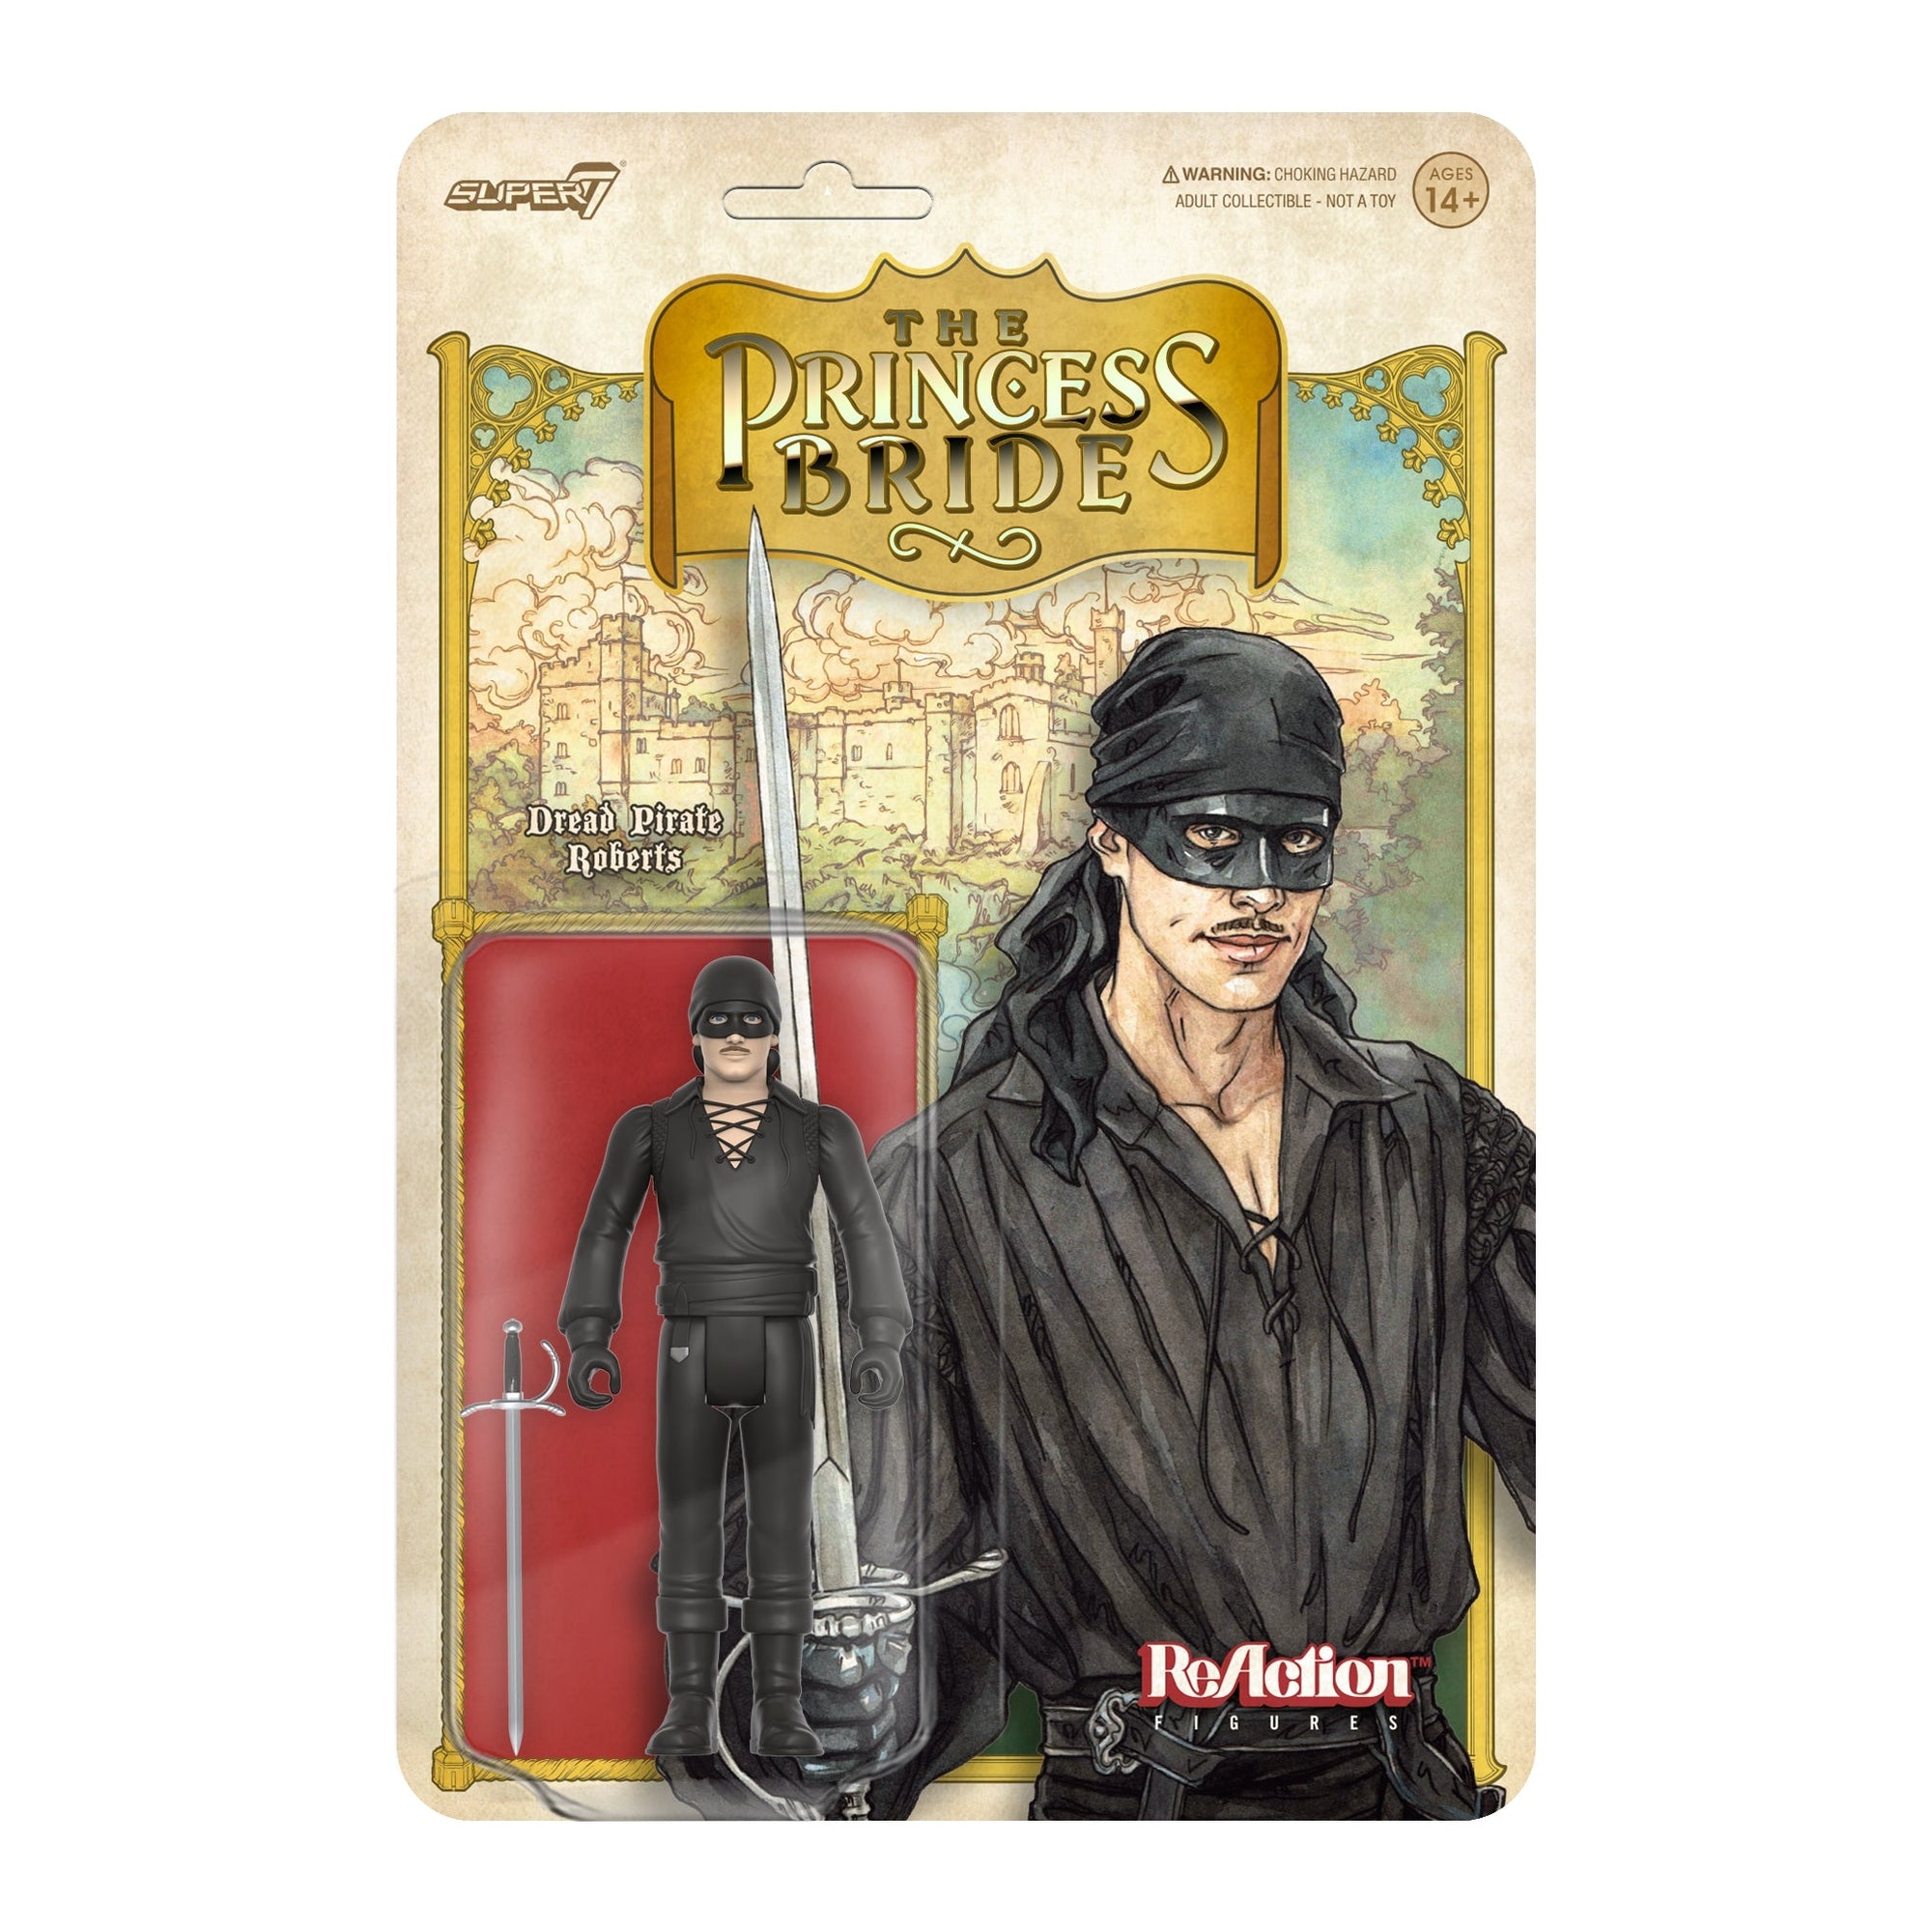 Dread Pirate Roberts- The Princess Bride ReAction by Super7